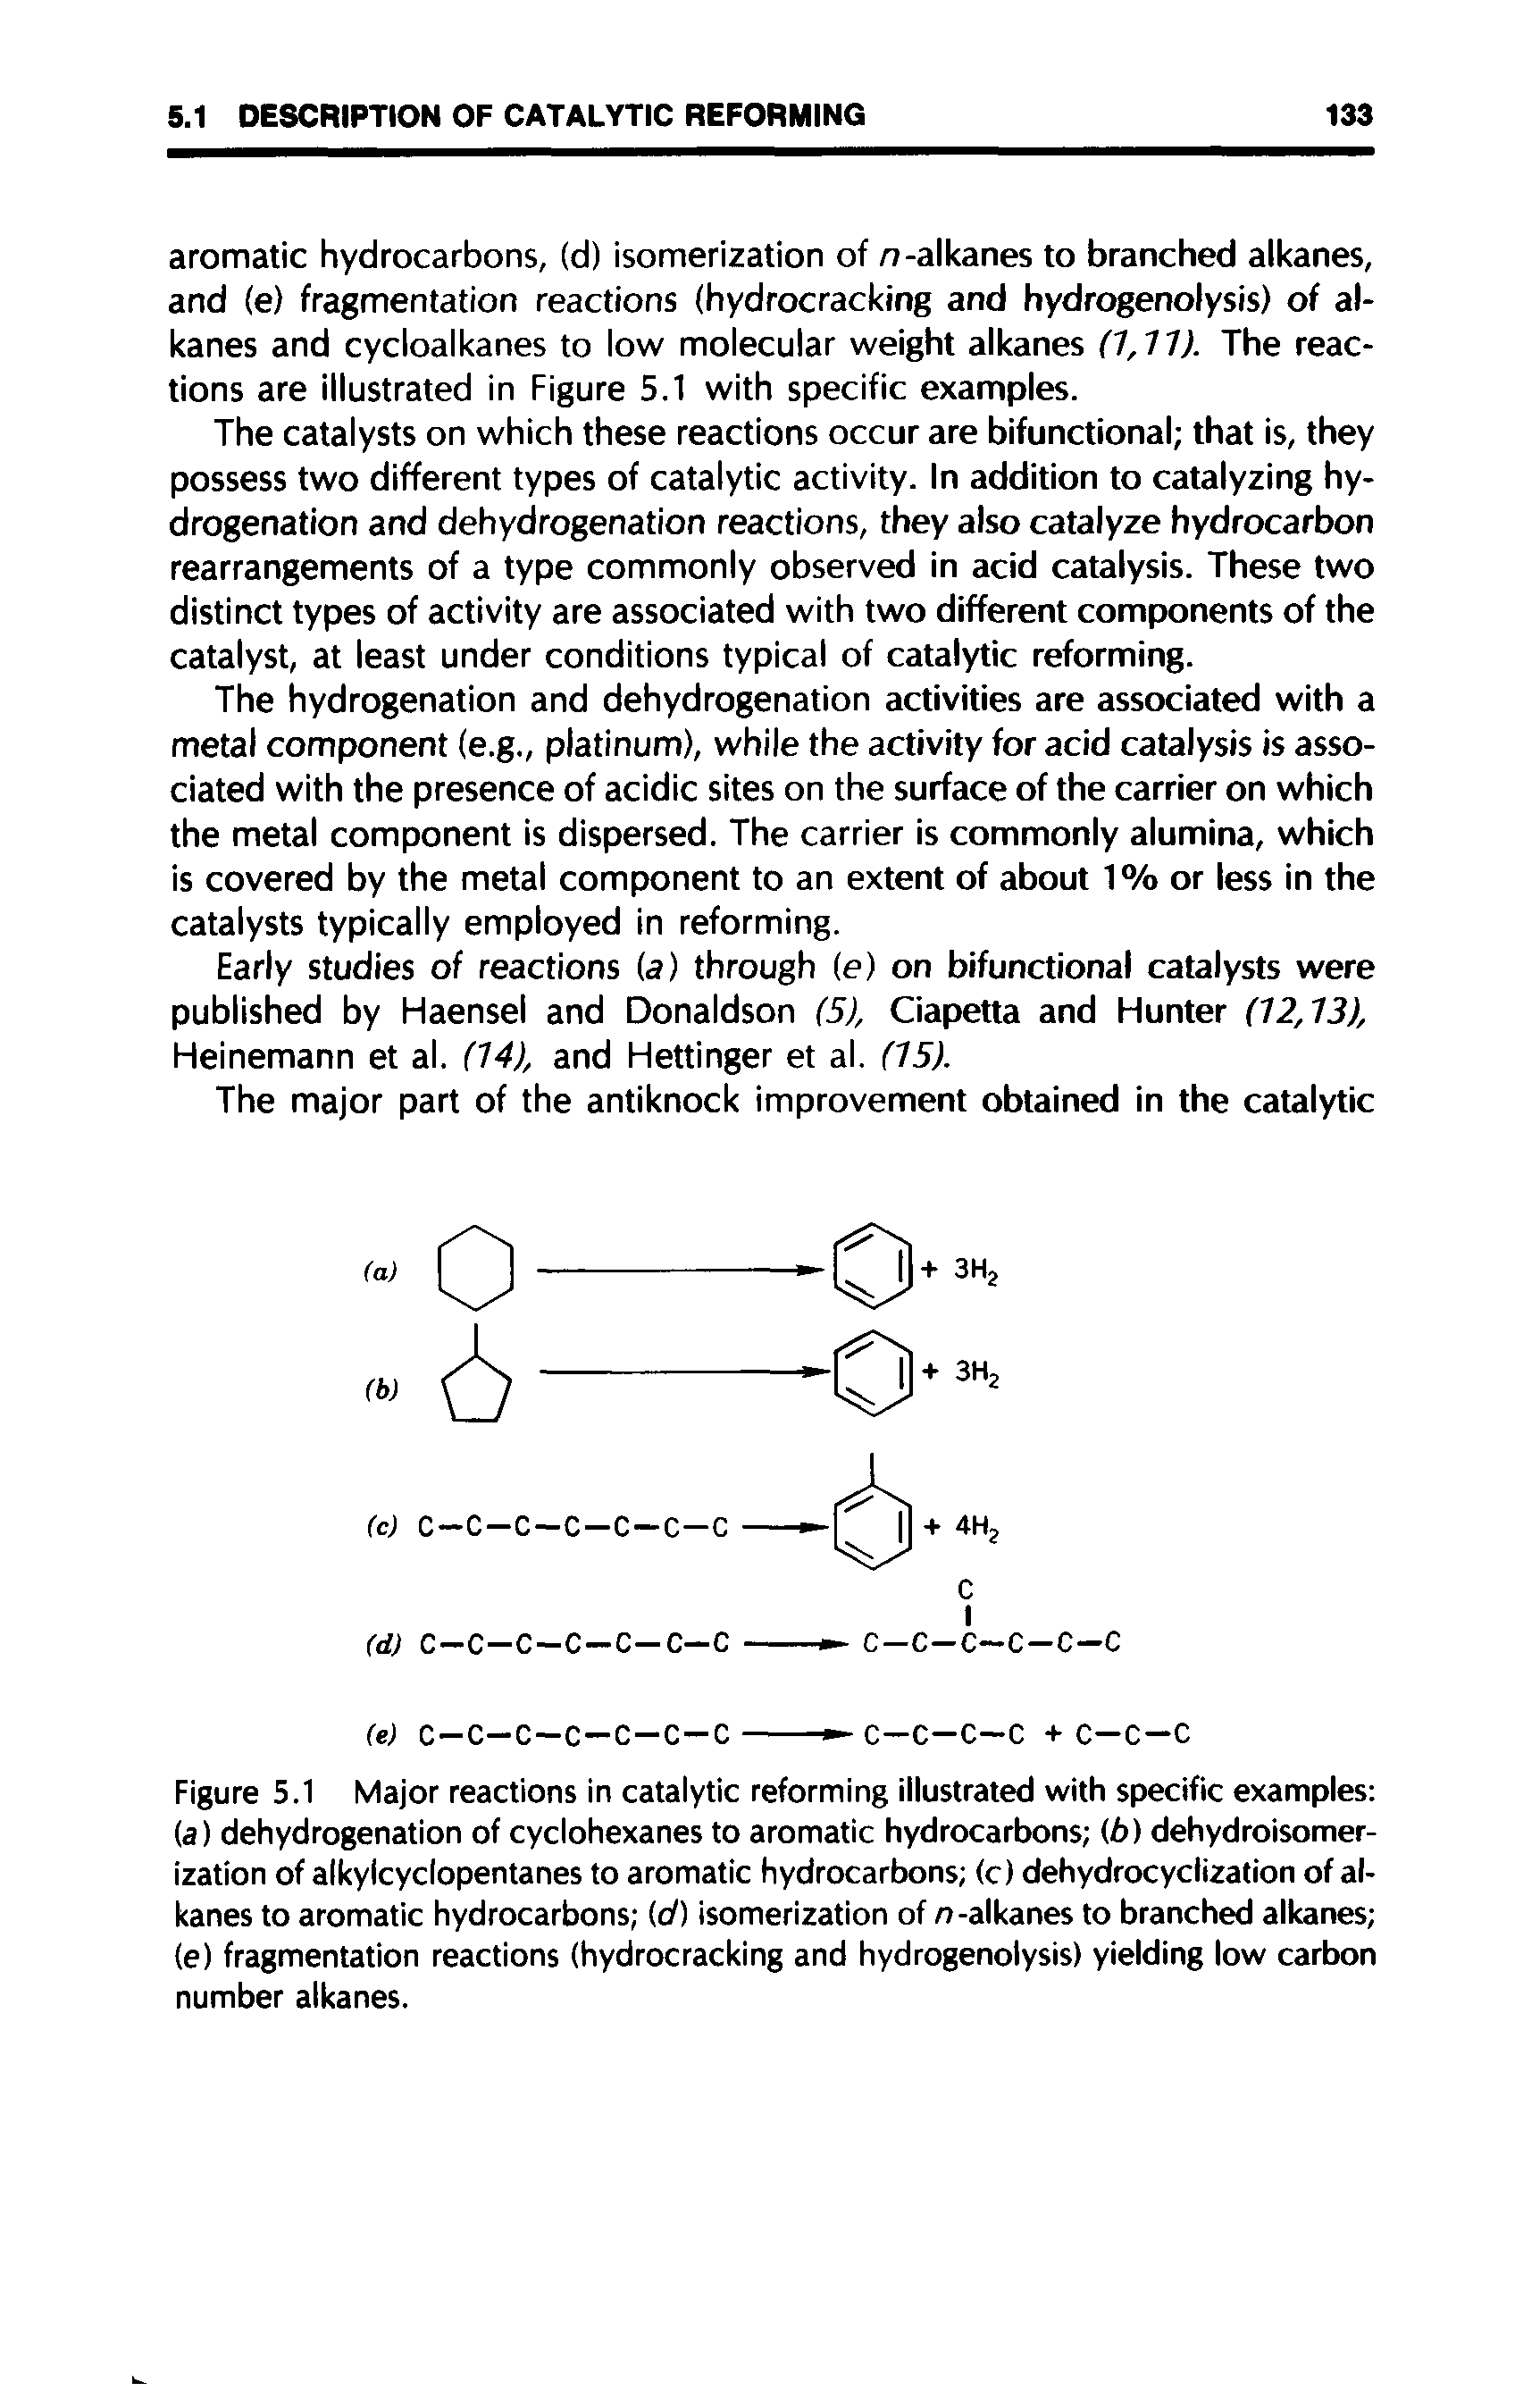 Figure 5.1 Major reactions in catalytic reforming illustrated with specific examples (a) dehydrogenation of cyclohexanes to aromatic hydrocarbons (b) dehydroisomerization of alkylcyclopentanes to aromatic hydrocarbons (c) dehydrocyclization of alkanes to aromatic hydrocarbons (d) isomerization of n -alkanes to branched alkanes (e) fragmentation reactions (hydrocracking and hydrogenolysis) yielding low carbon number alkanes.